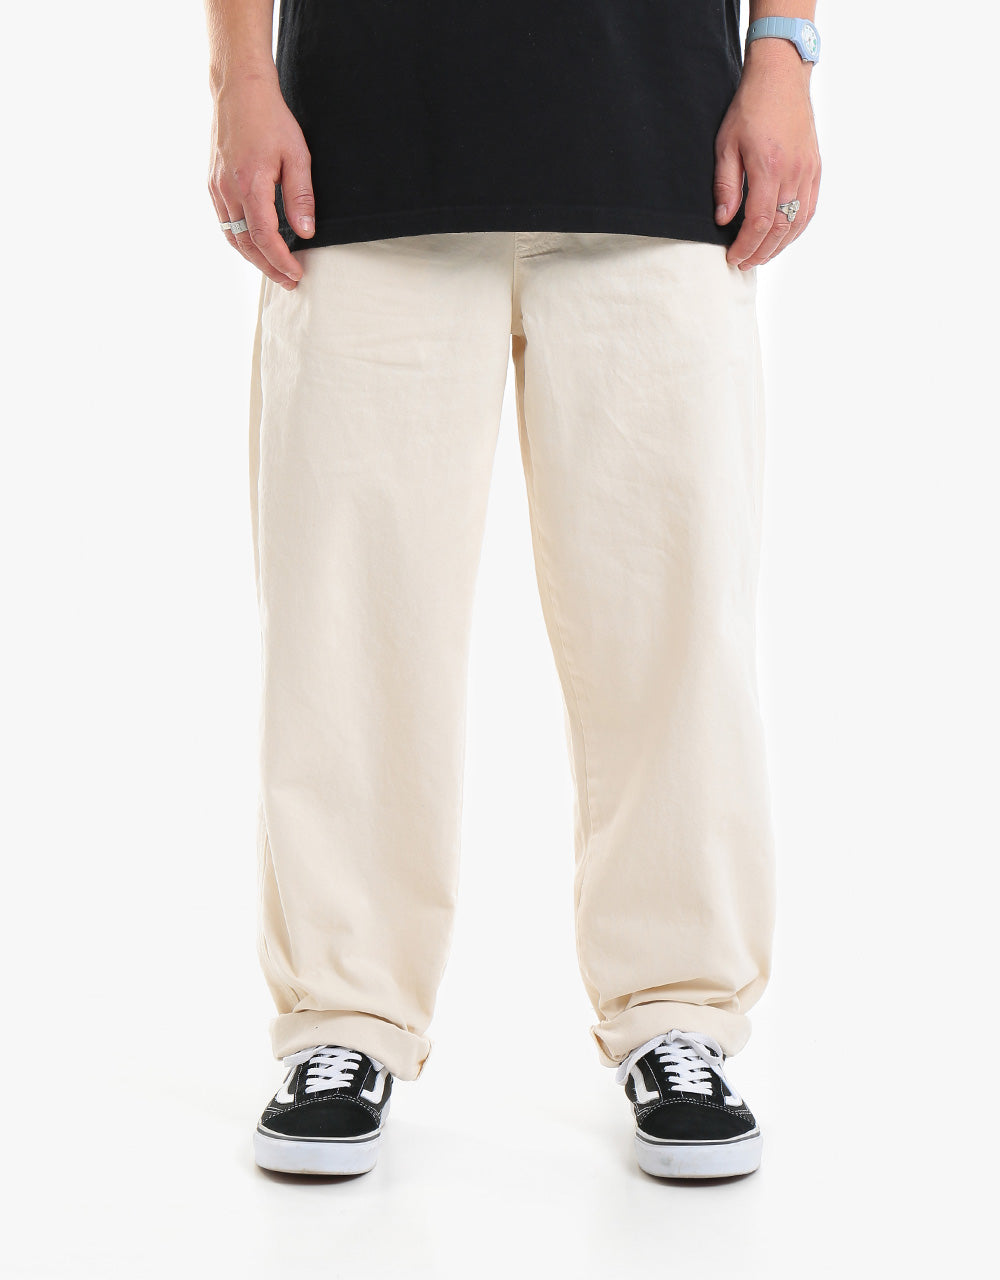 Route One Organic Baggy Pants - Off White